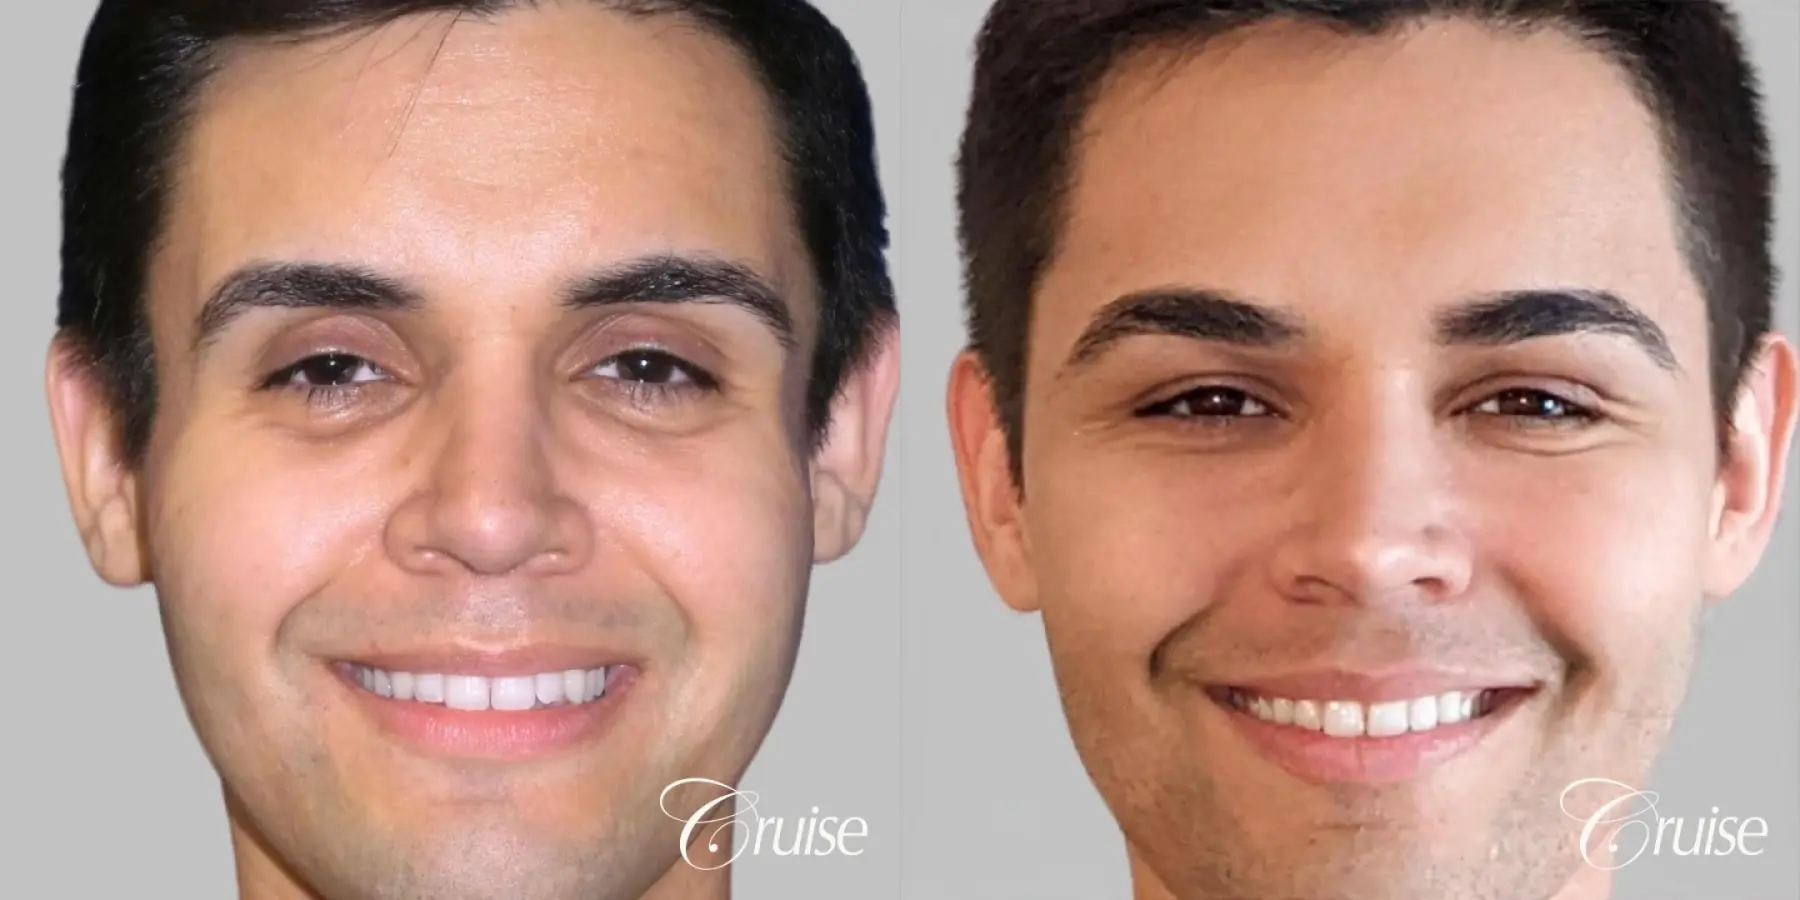 Male - Fat Transfer to Cheeks, Temple, and Tear Trough - Before and After  